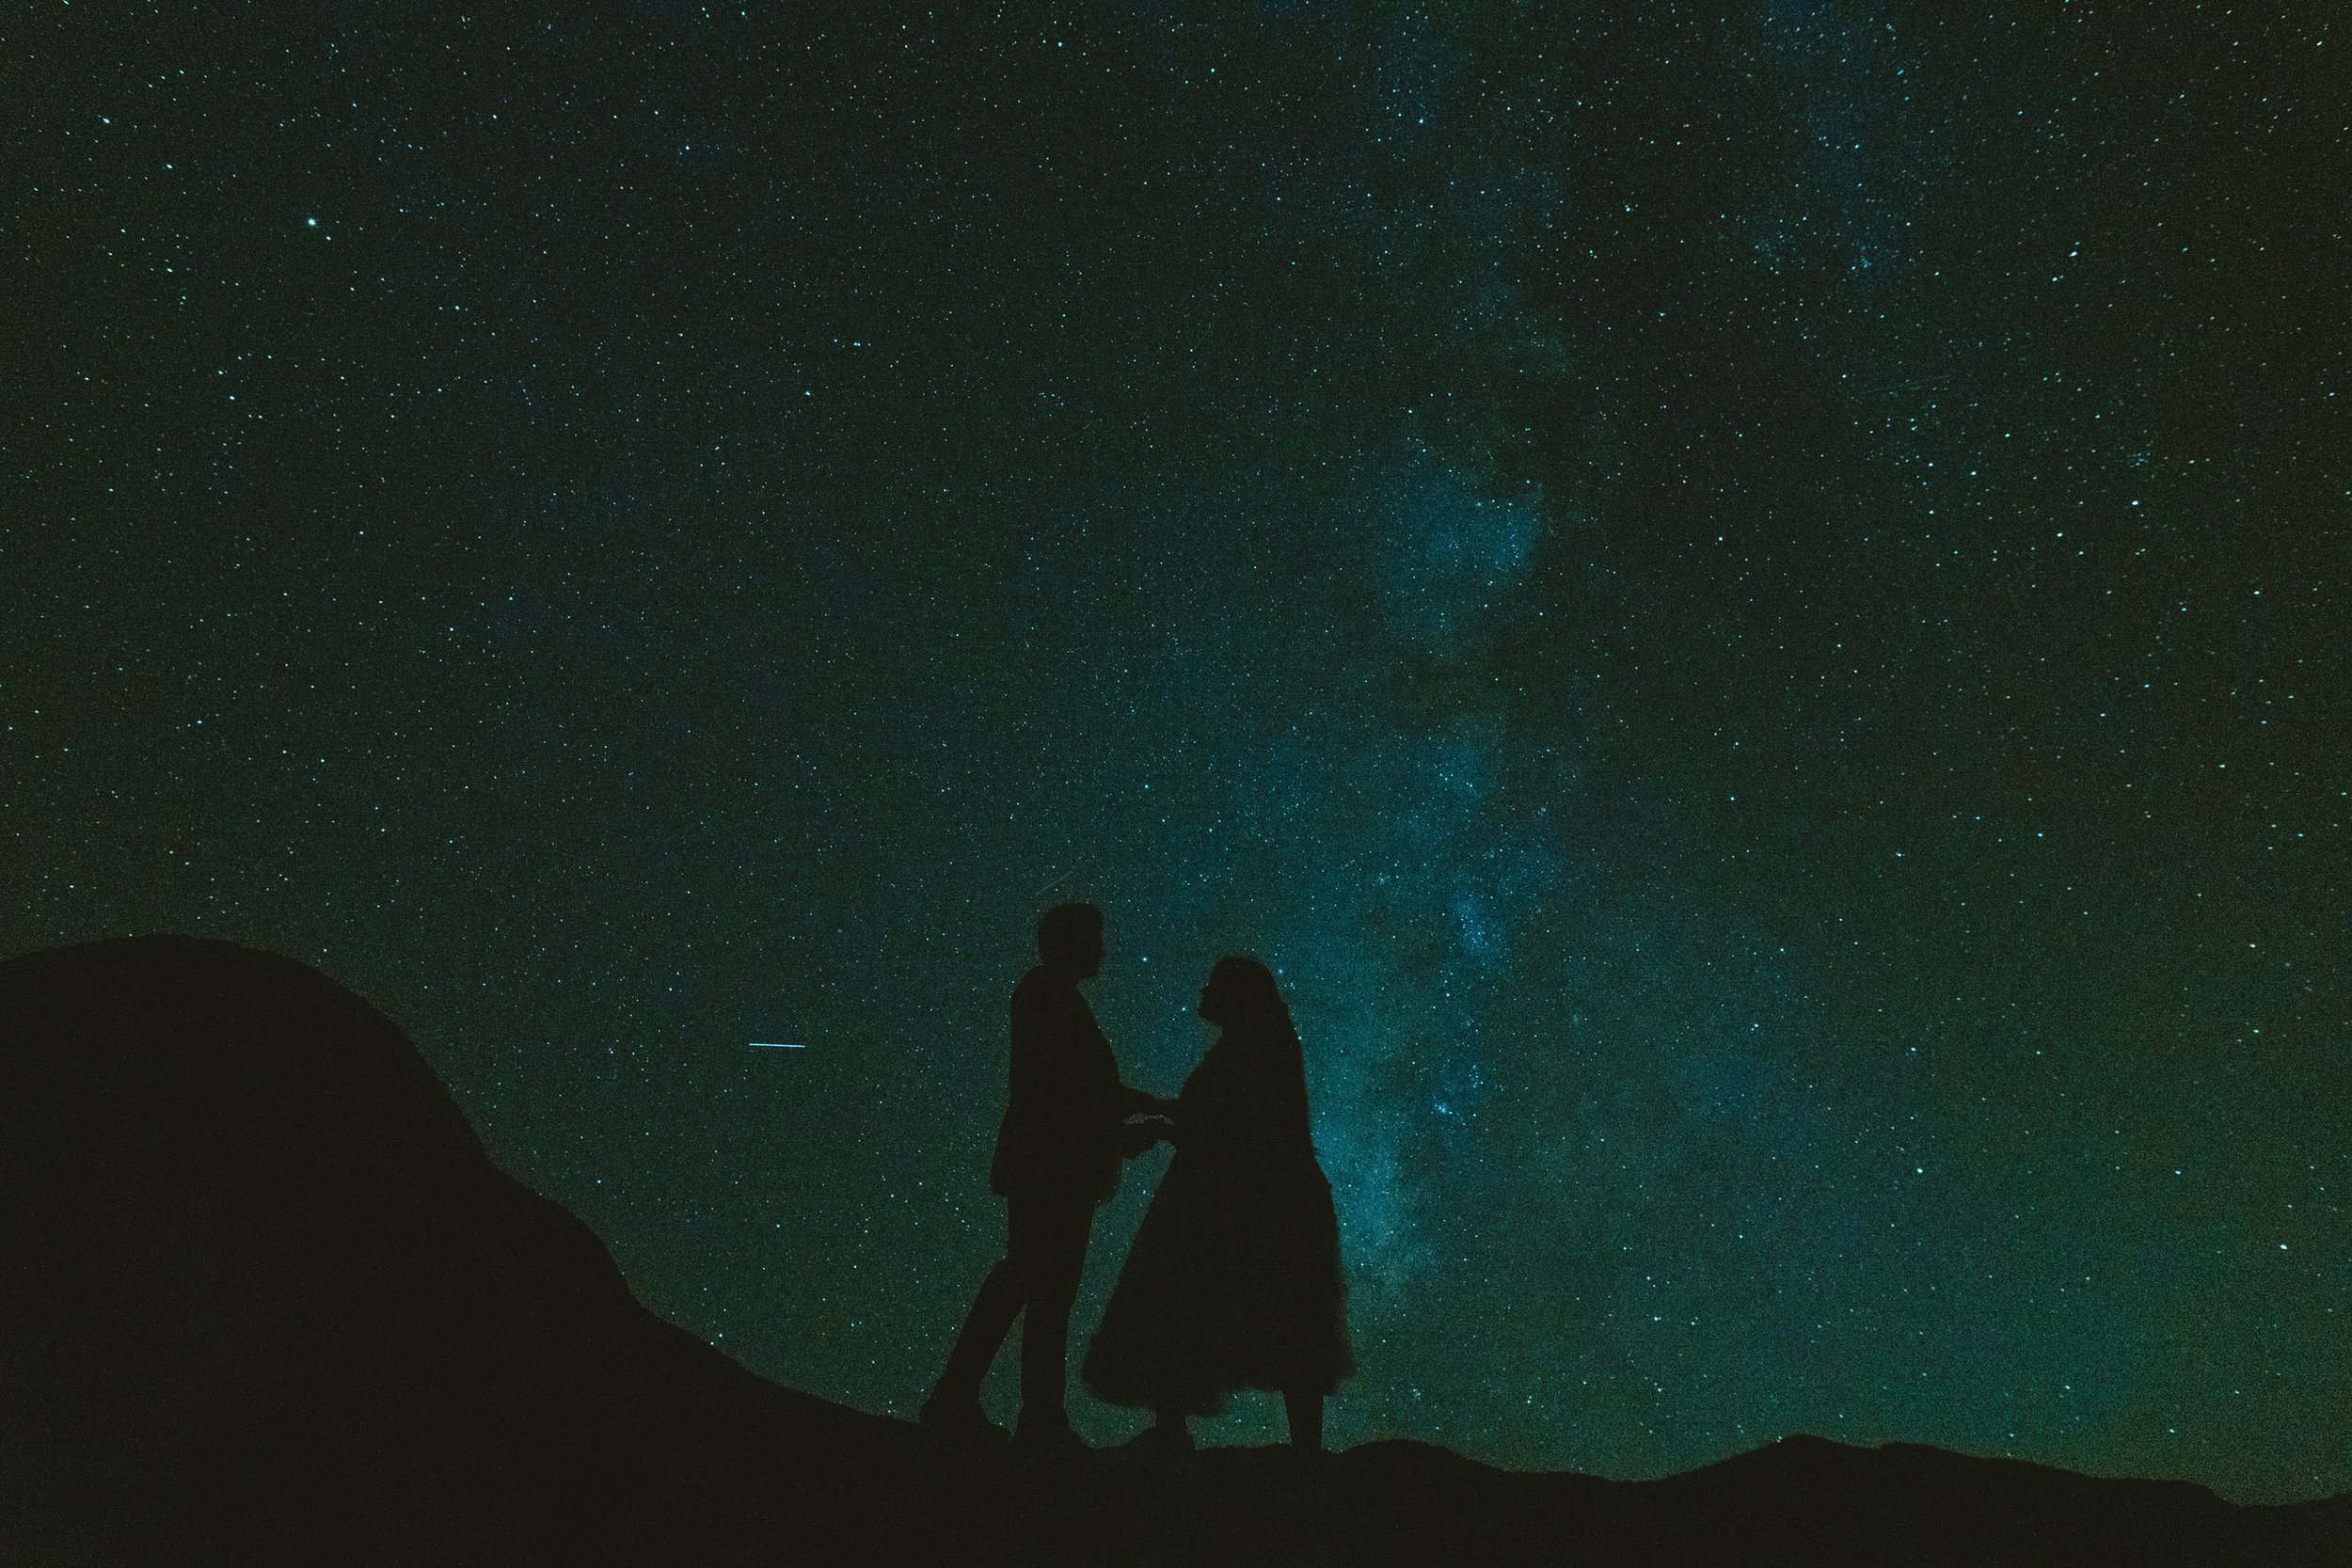 Milky Way Astrophotography Engagement Proposal-55-1.jpg